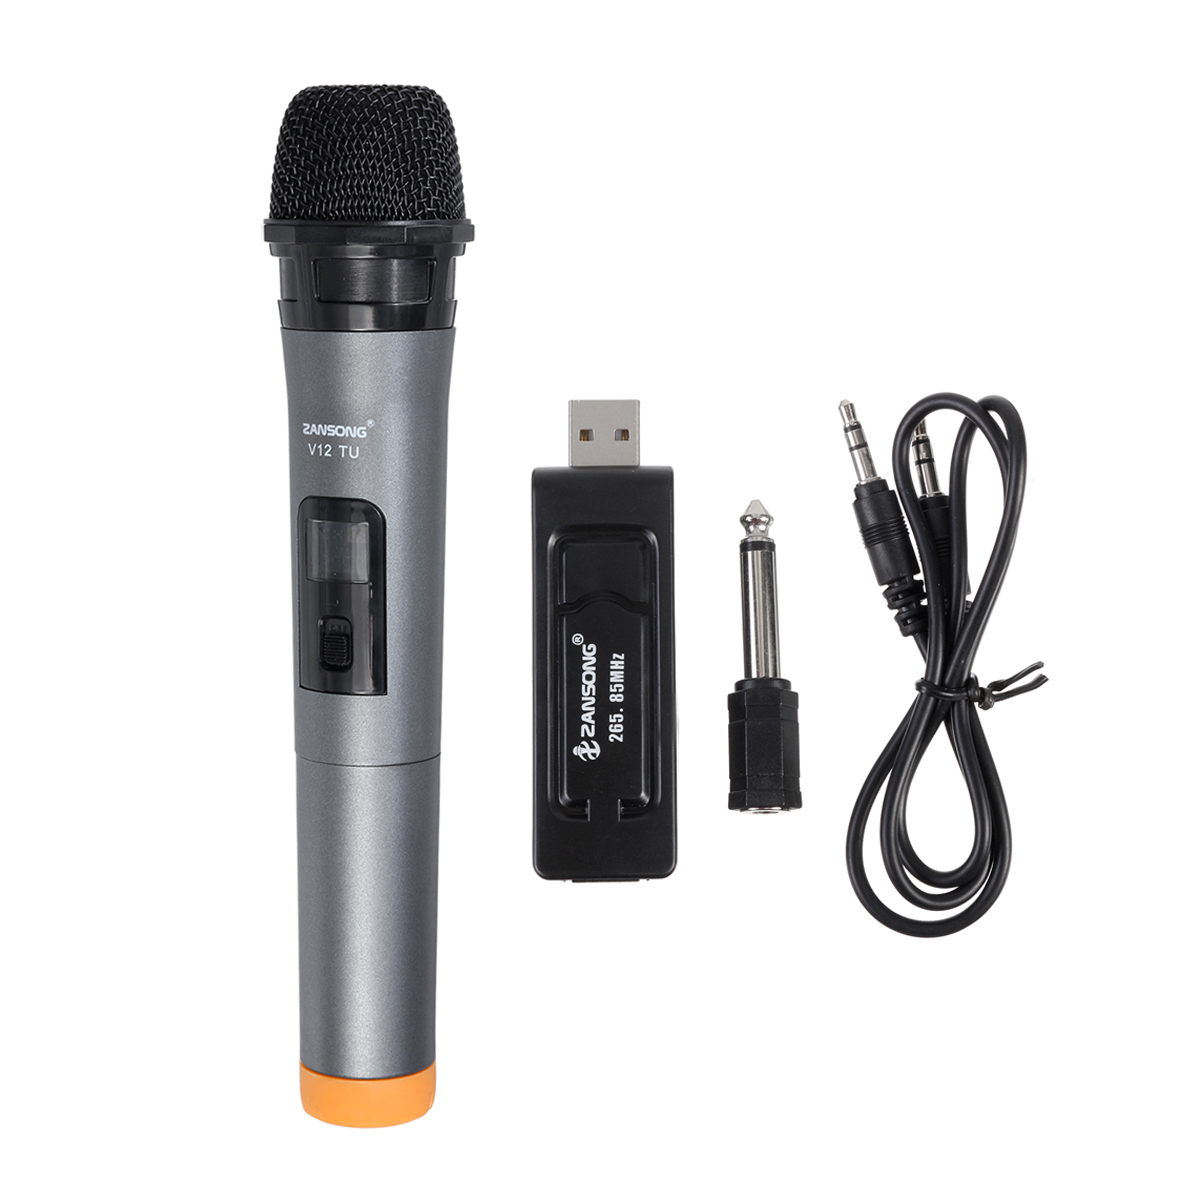 Professional UHF Wireless Microphone Handheld Mic System Karaoke with Receiver and Display Screen